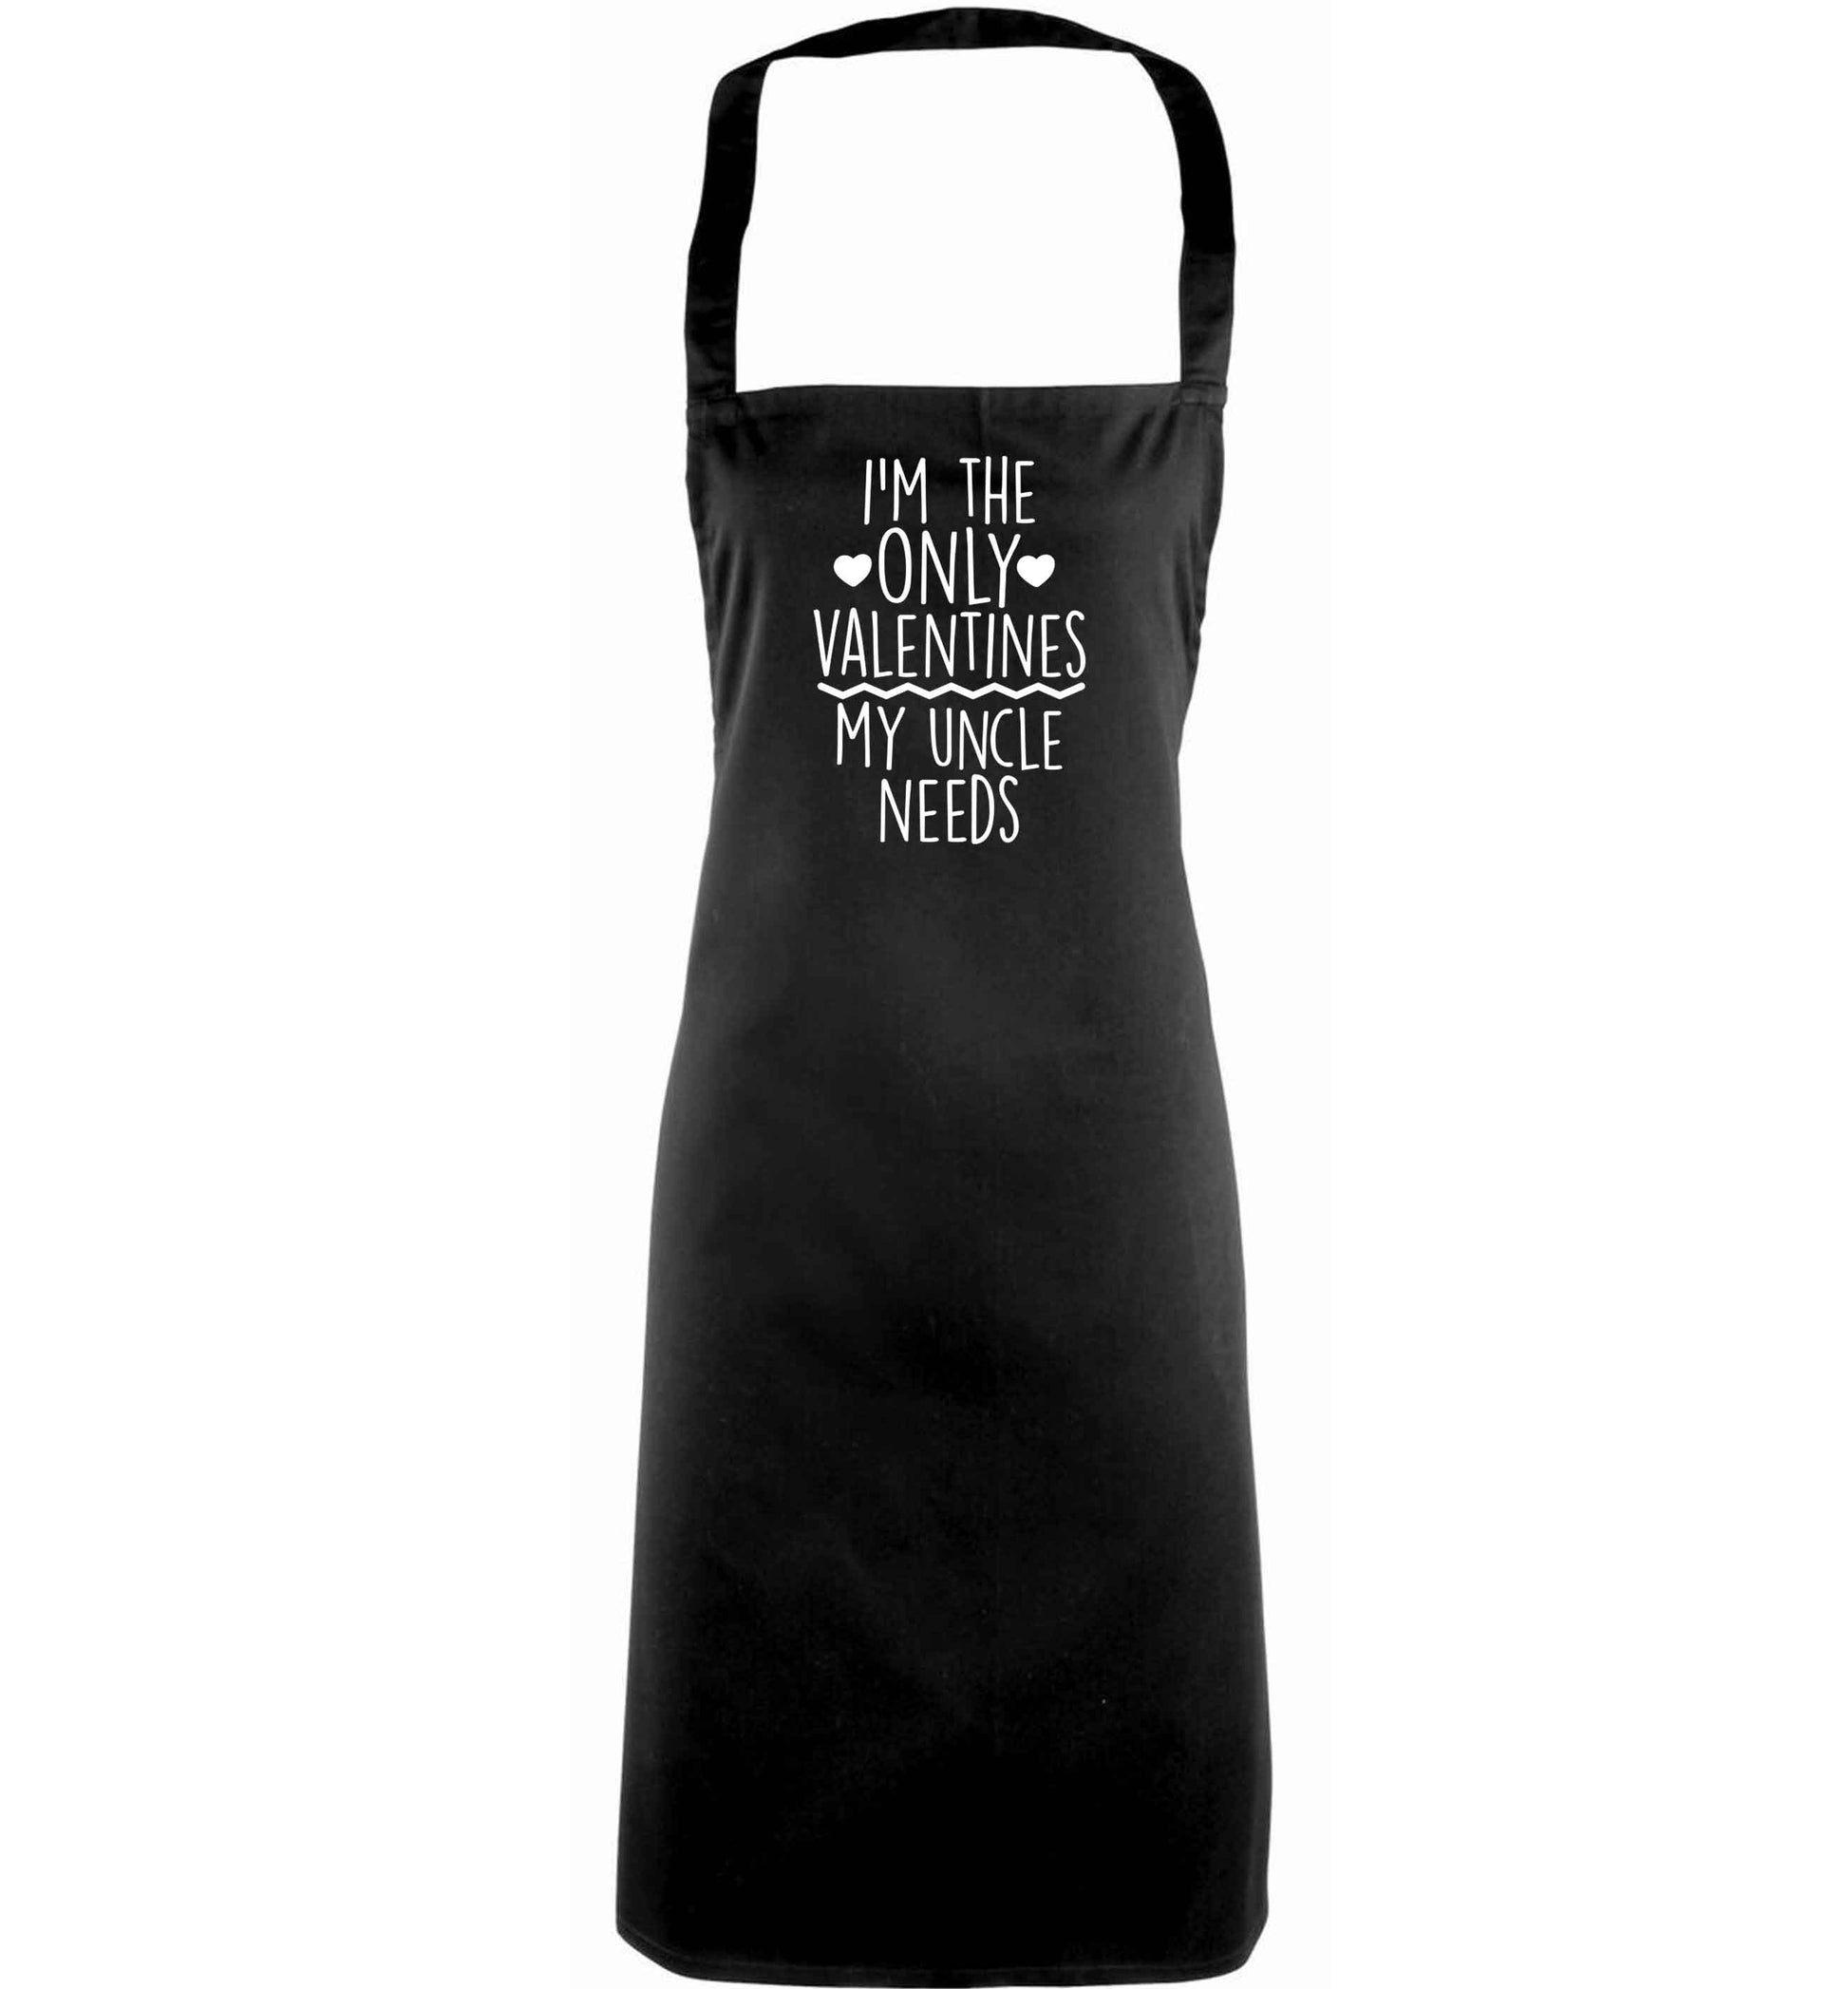 I'm the only valentines my uncle needs adults black apron